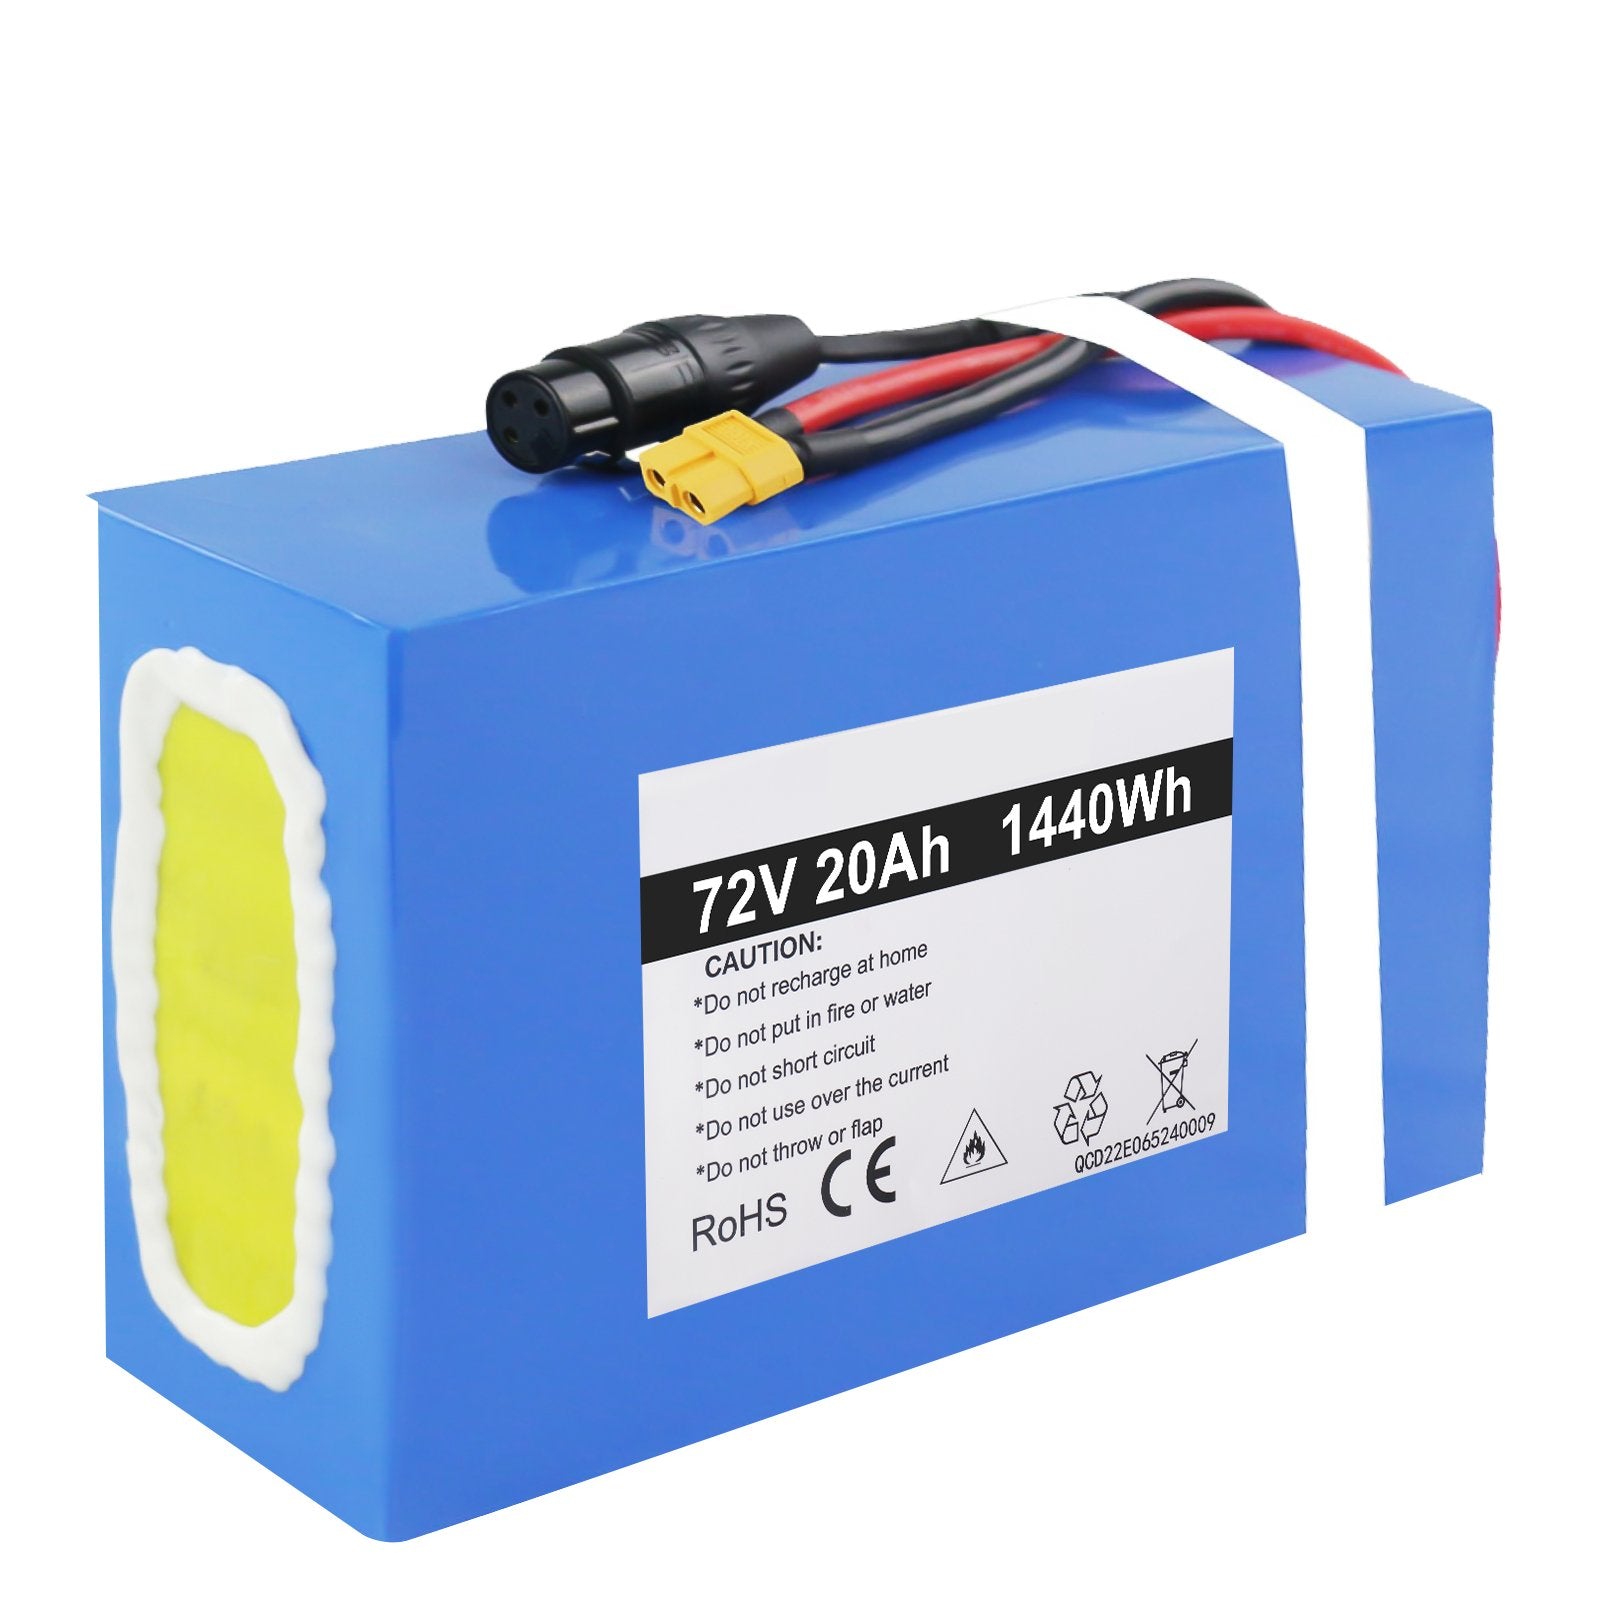 Waterproof 72V 20AH Ebike Battery with 60A BMS Protection for 3000W 2500W 2000W 1500W Ebike, Motorcycle, Scooter, Go Kart